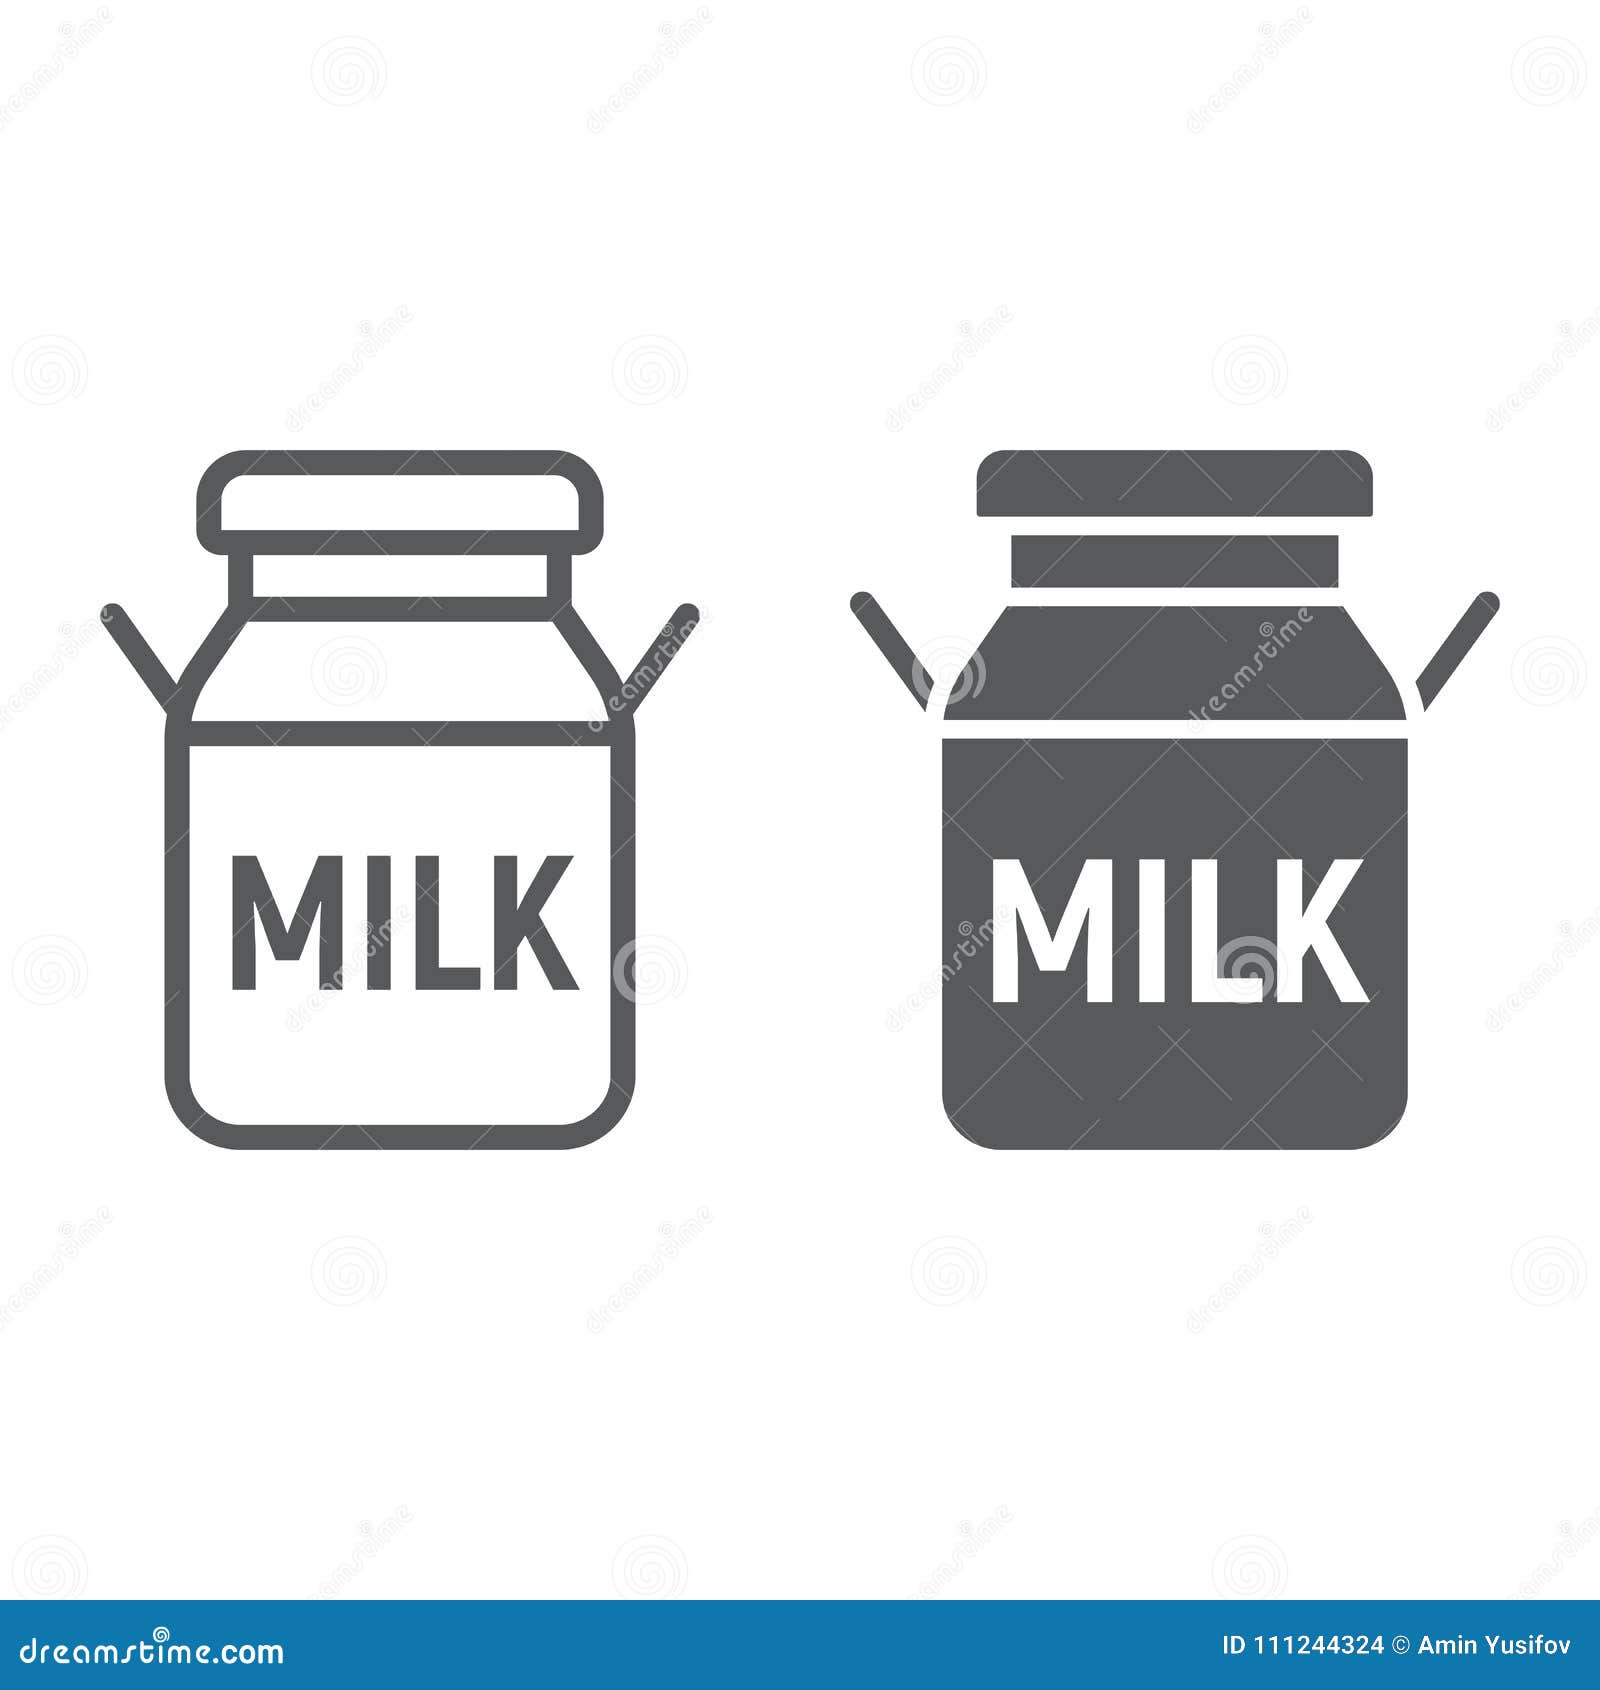 https://thumbs.dreamstime.com/z/milk-can-line-glyph-icon-farming-milk-can-line-glyph-icon-farming-agriculture-milk-container-sign-vector-graphics-111244324.jpg